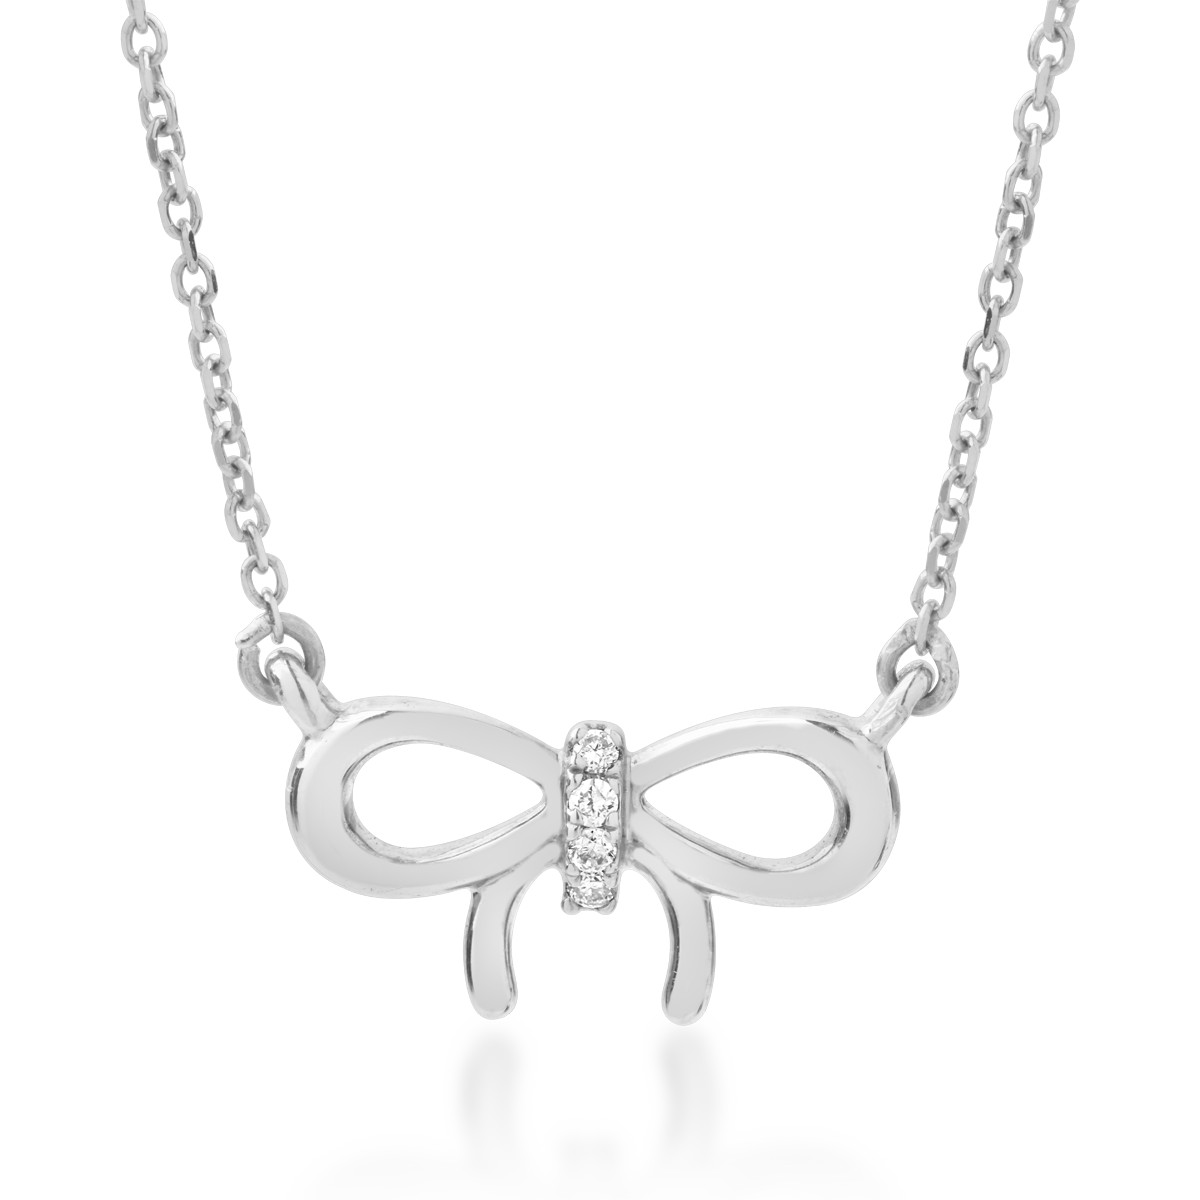 18K white gold knot pendant necklace with 0.01ct diamonds